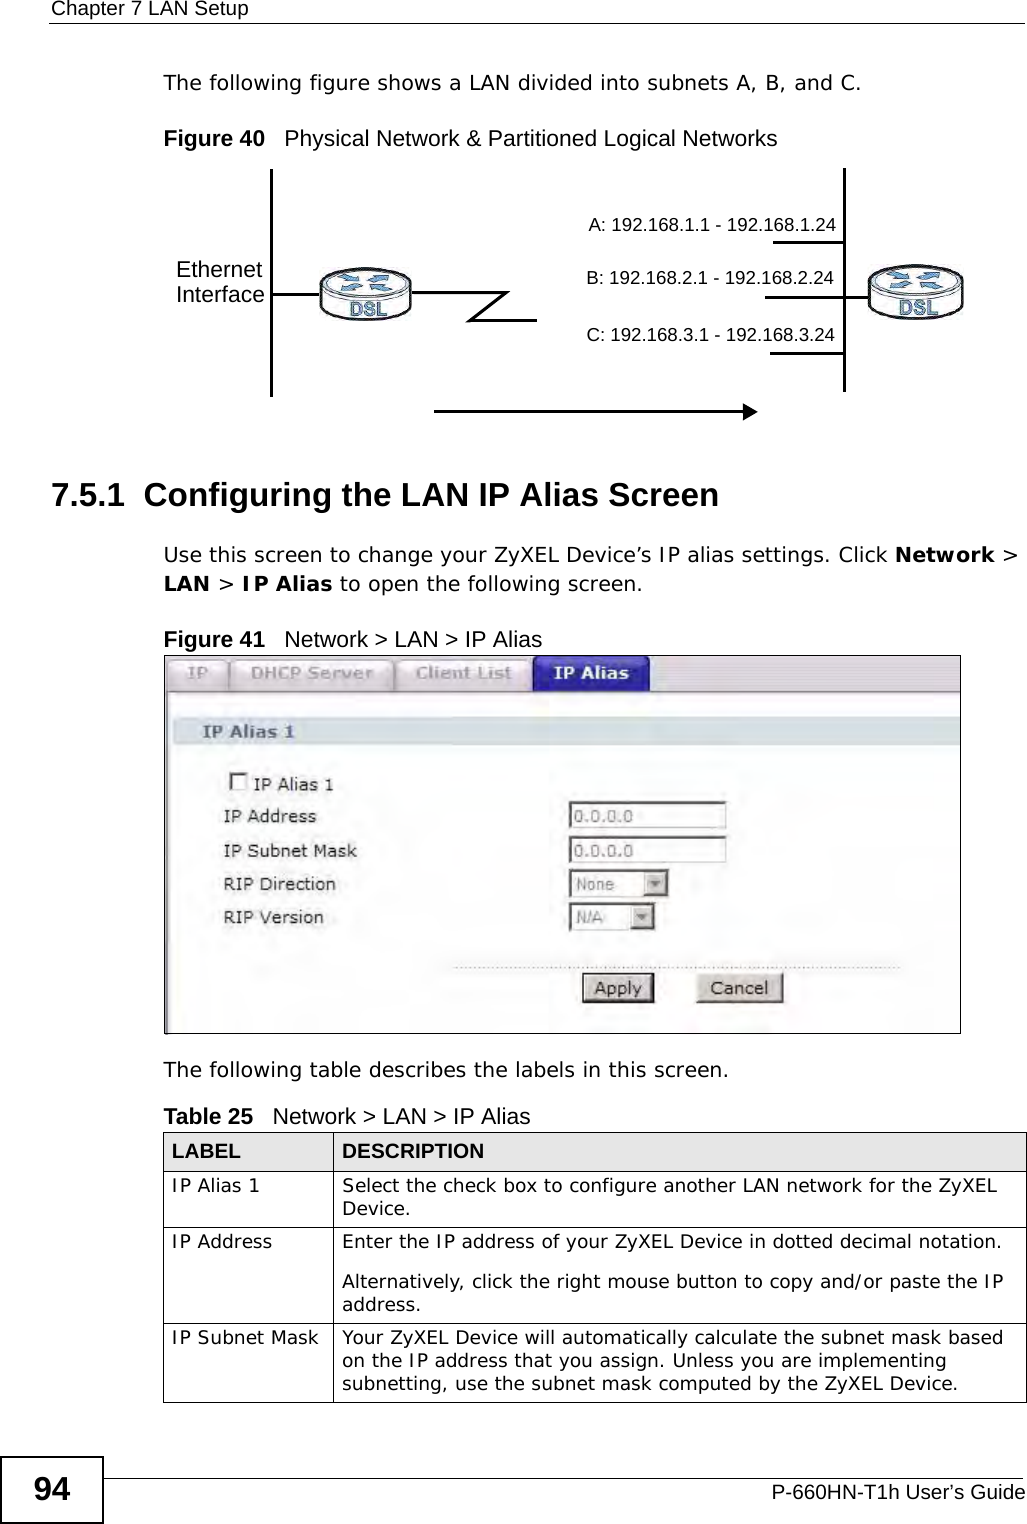 Chapter 7 LAN SetupP-660HN-T1h User’s Guide94The following figure shows a LAN divided into subnets A, B, and C.Figure 40   Physical Network &amp; Partitioned Logical Networks7.5.1  Configuring the LAN IP Alias ScreenUse this screen to change your ZyXEL Device’s IP alias settings. Click Network &gt; LAN &gt; IP Alias to open the following screen.Figure 41   Network &gt; LAN &gt; IP AliasThe following table describes the labels in this screen. EthernetInterfaceA: 192.168.1.1 - 192.168.1.24B: 192.168.2.1 - 192.168.2.24C: 192.168.3.1 - 192.168.3.24Table 25   Network &gt; LAN &gt; IP Alias LABEL DESCRIPTIONIP Alias 1 Select the check box to configure another LAN network for the ZyXEL Device.IP Address Enter the IP address of your ZyXEL Device in dotted decimal notation. Alternatively, click the right mouse button to copy and/or paste the IP address.IP Subnet Mask Your ZyXEL Device will automatically calculate the subnet mask based on the IP address that you assign. Unless you are implementing subnetting, use the subnet mask computed by the ZyXEL Device.